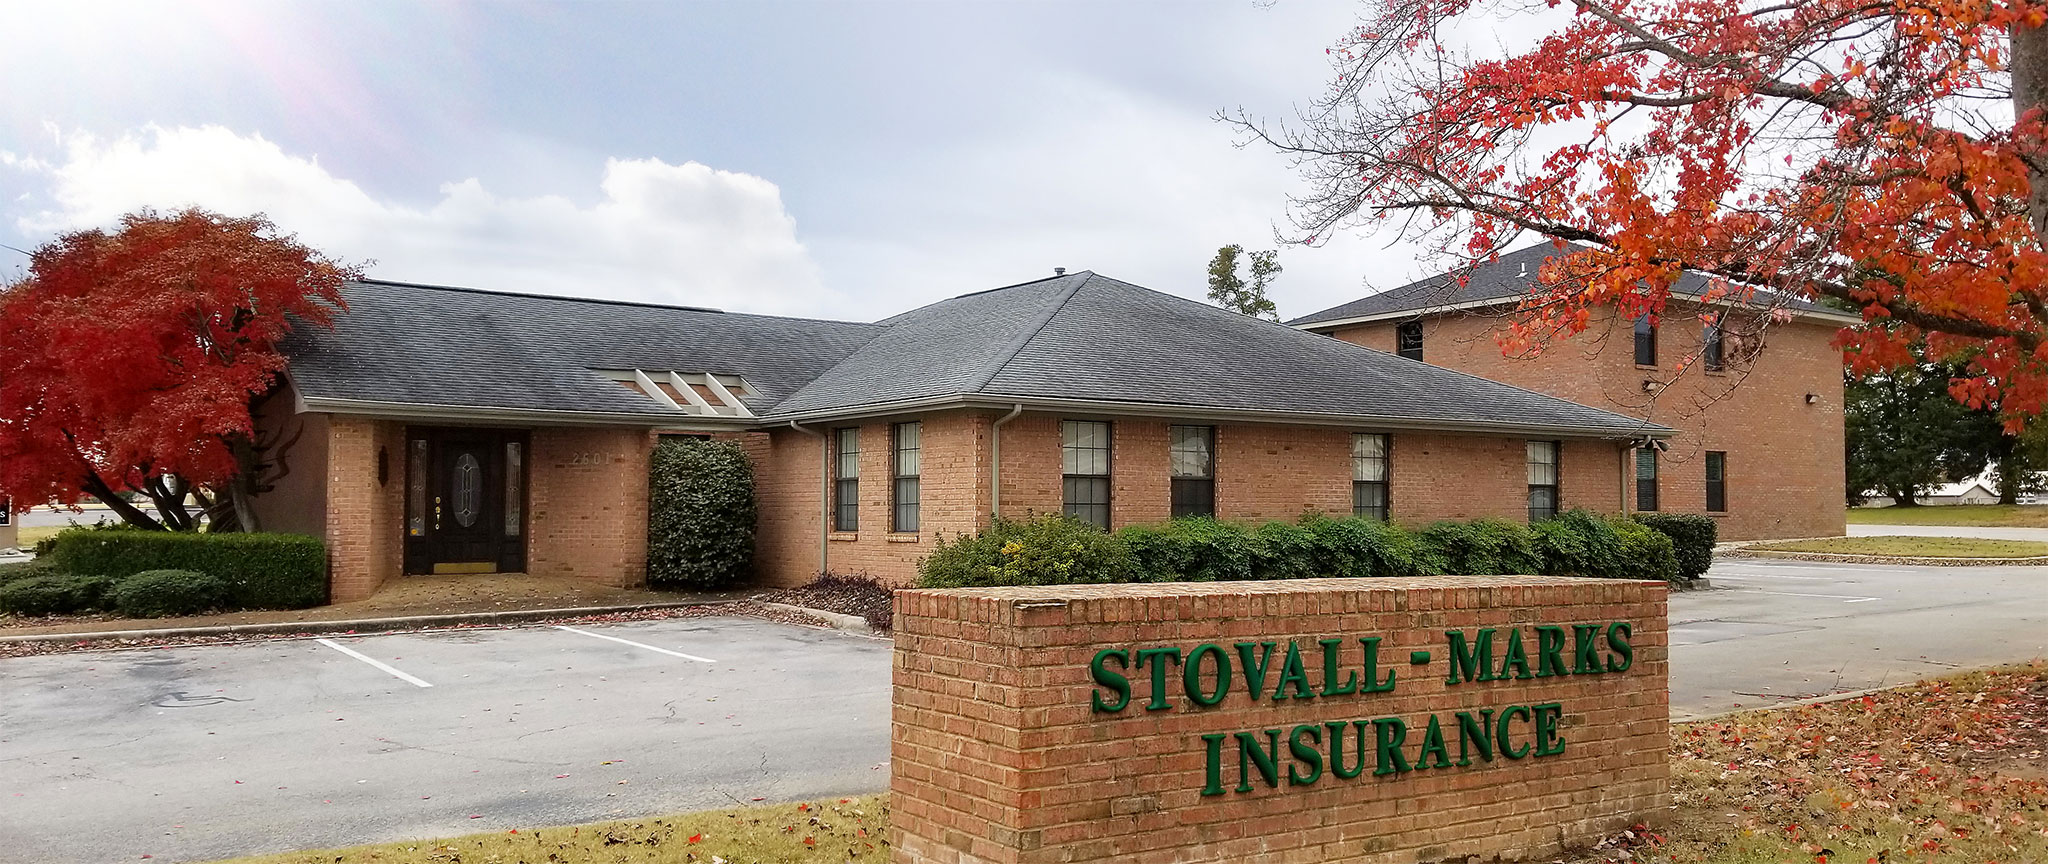 Stovall Marks Insurance located in Decatur, AL.